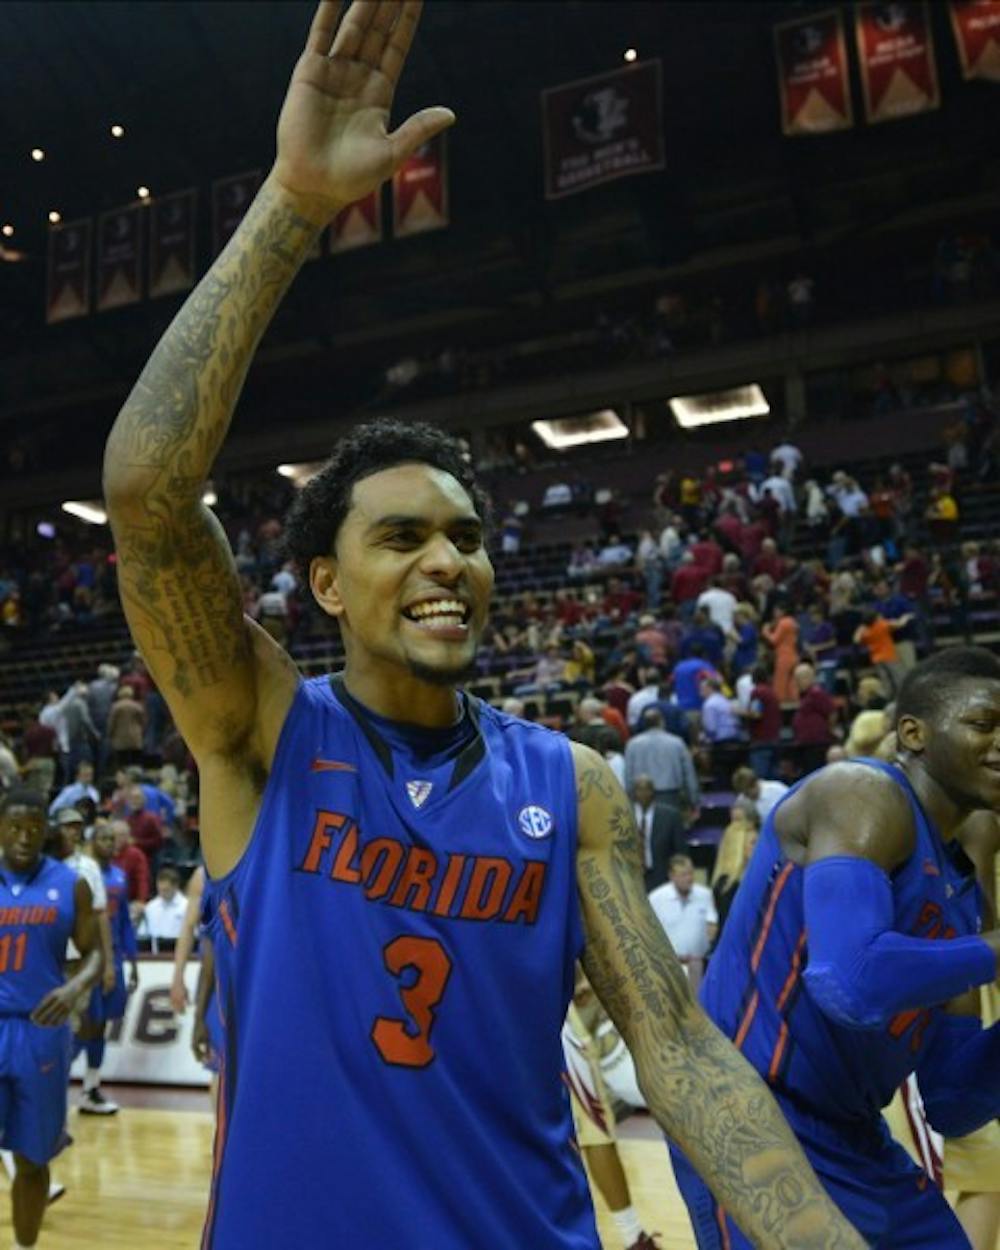 <p>Redshirt senior guard Mike Rosario reacts to Florida's 72-47 win against Florida State in Tallahassee on Wednesday, Dec. 5, 2012. Rosario scored a game-high 22 points during UF's 83-52 victory against Auburn on Saturday.&nbsp;</p>